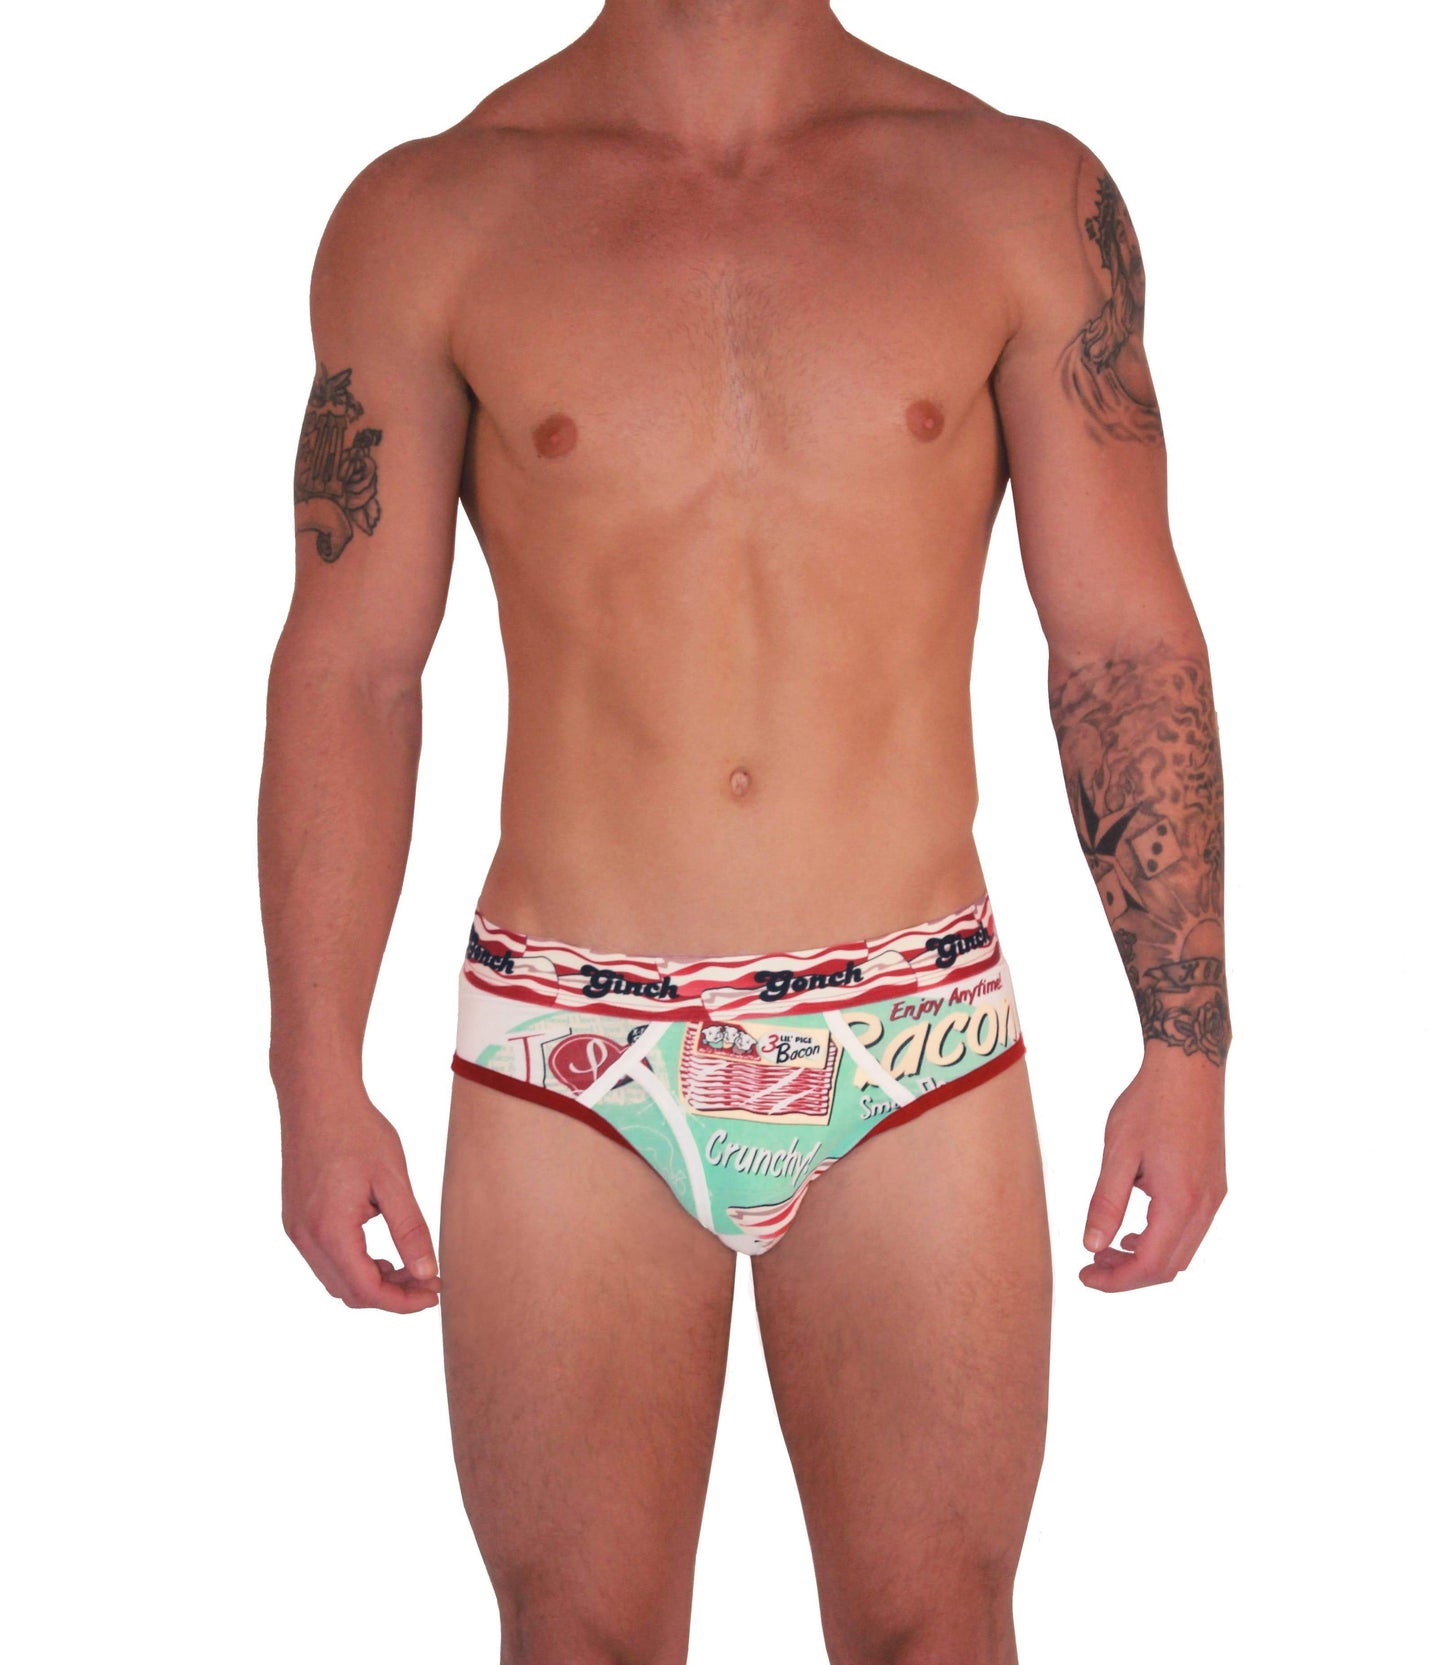 I Love Bacon Boxer Low Rise Brief Ginch Gonch Men's underwear with white teal and bacon detail front